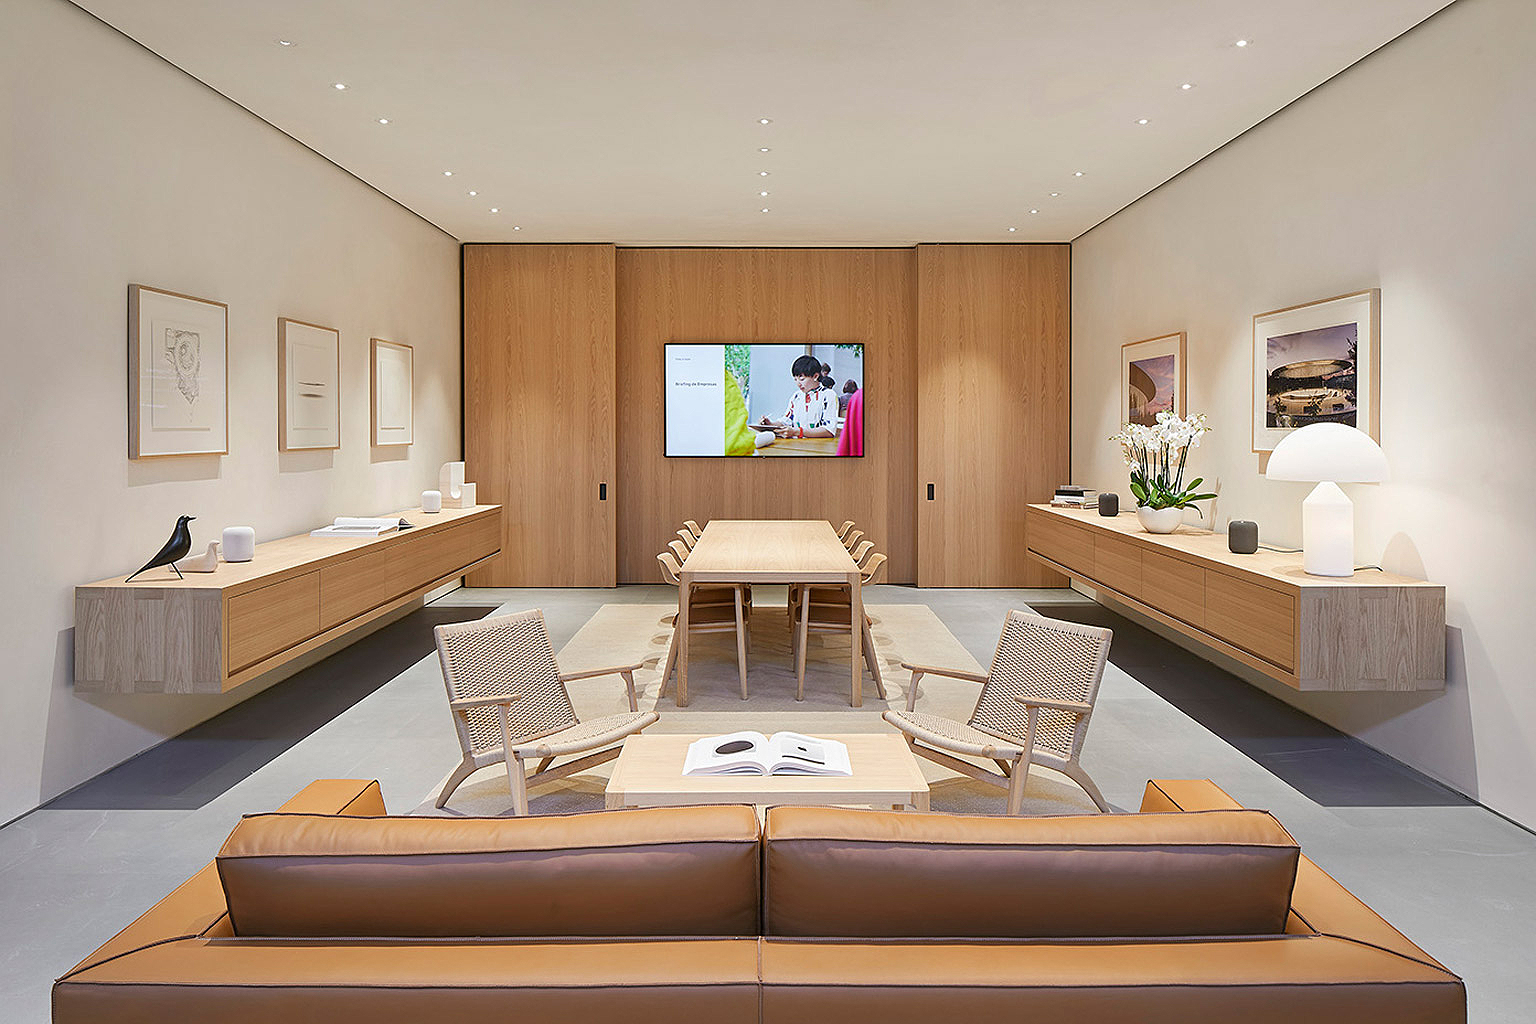 Cataloging The Modern Furnishings Of Apple Store Boardrooms